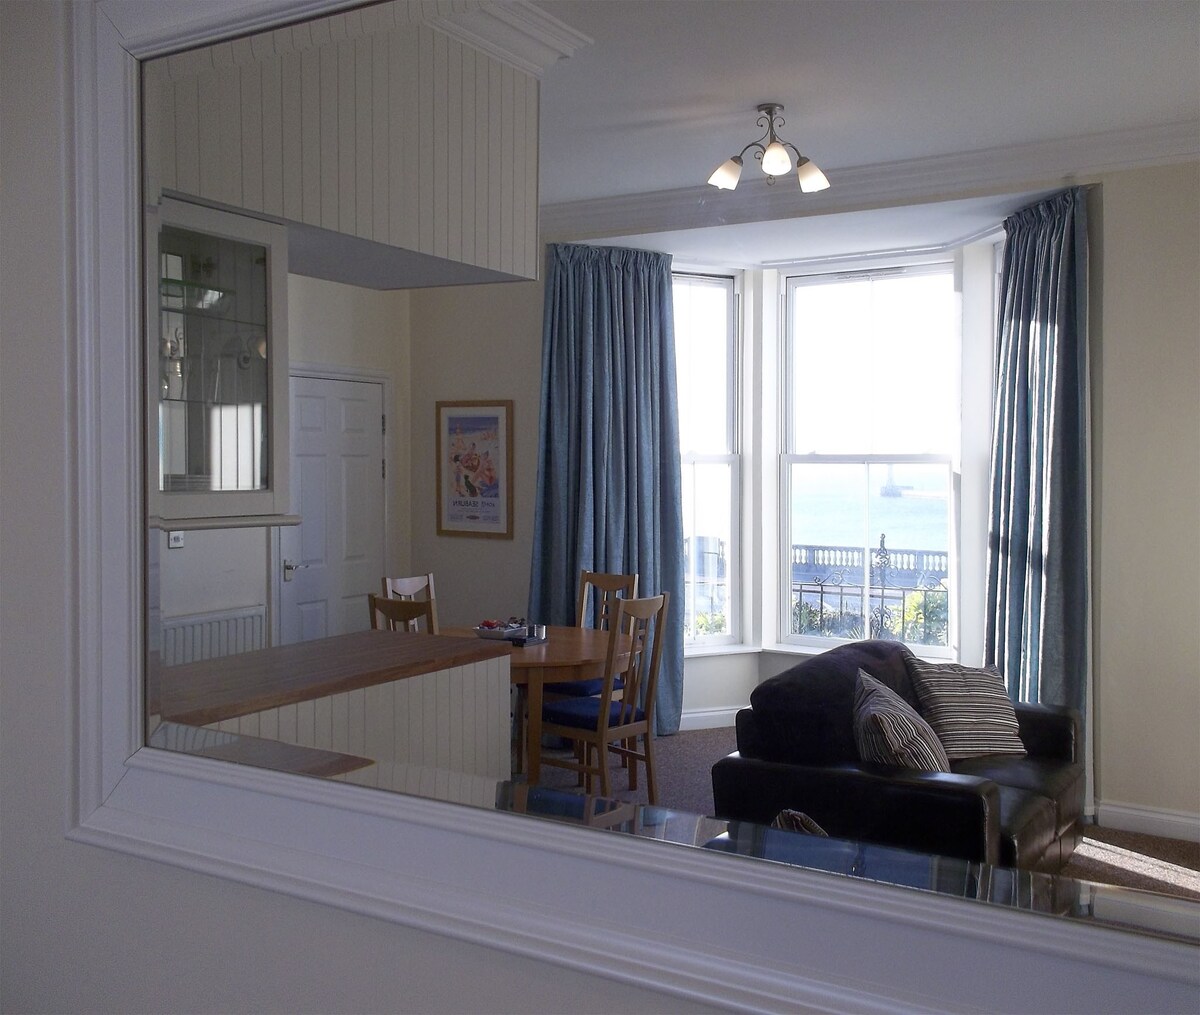 Roker Seafront Apartments Flat 3